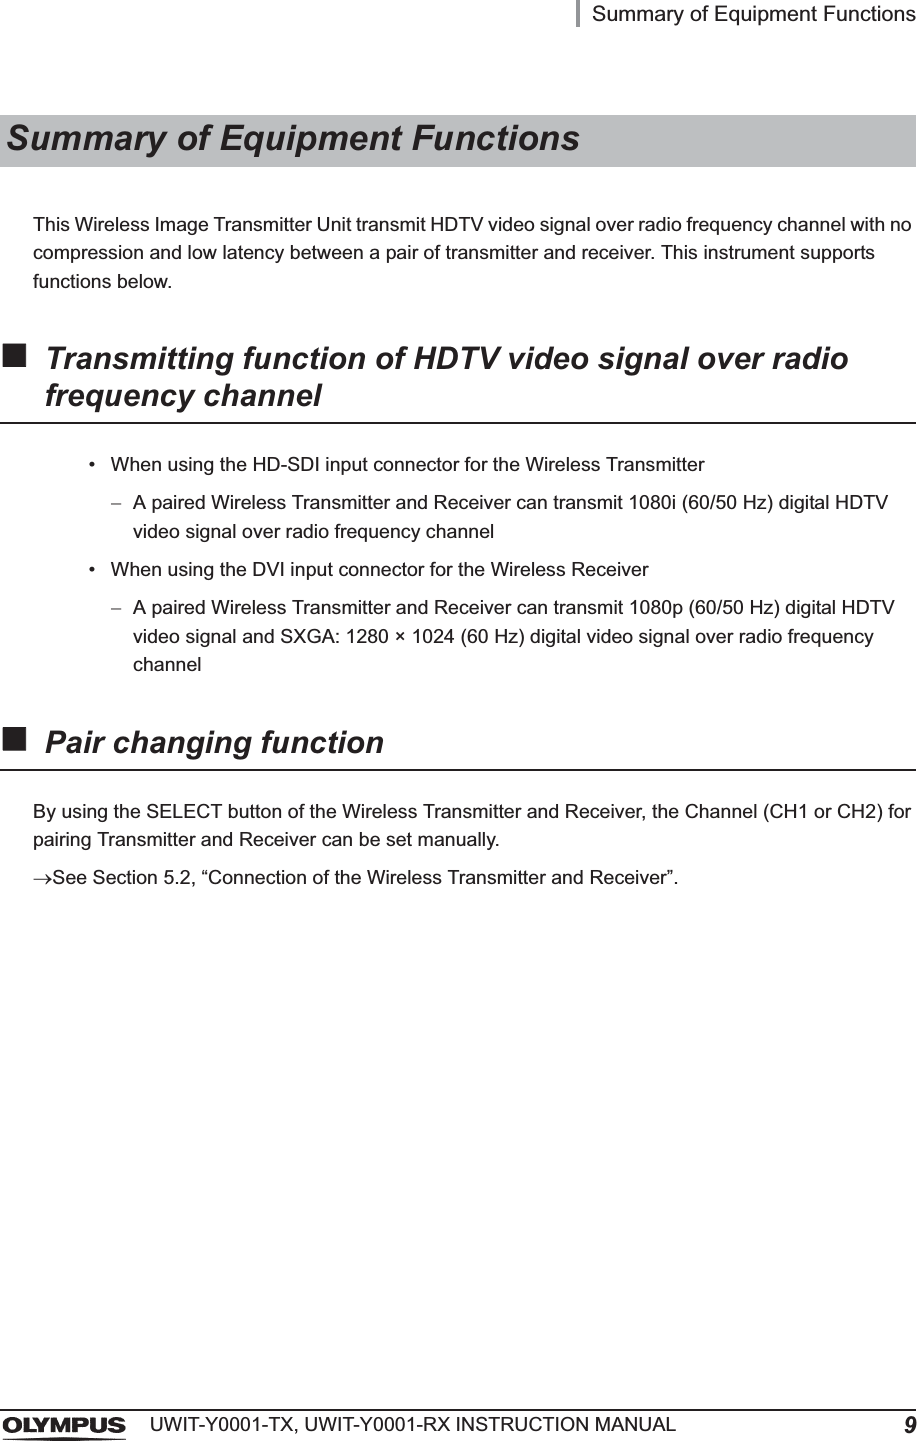 Summary of Equipment Functions9UWIT-Y0001-TX, UWIT-Y0001-RX INSTRUCTION MANUALThis Wireless Image Transmitter Unit transmit HDTV video signal over radio frequency channel with no compression and low latency between a pair of transmitter and receiver. This instrument supports functions below.Transmitting function of HDTV video signal over radio frequency channel• When using the HD-SDI input connector for the Wireless TransmitterA paired Wireless Transmitter and Receiver can transmit 1080i (60/50 Hz) digital HDTV video signal over radio frequency channel• When using the DVI input connector for the Wireless ReceiverA paired Wireless Transmitter and Receiver can transmit 1080p (60/50 Hz) digital HDTV video signal and SXGA: 1280 × 1024 (60 Hz) digital video signal over radio frequency channelPair changing functionBy using the SELECT button of the Wireless Transmitter and Receiver, the Channel (CH1 or CH2) for pairing Transmitter and Receiver can be set manually.oSee Section 5.2, “Connection of the Wireless Transmitter and Receiver”.Summary of Equipment Functions